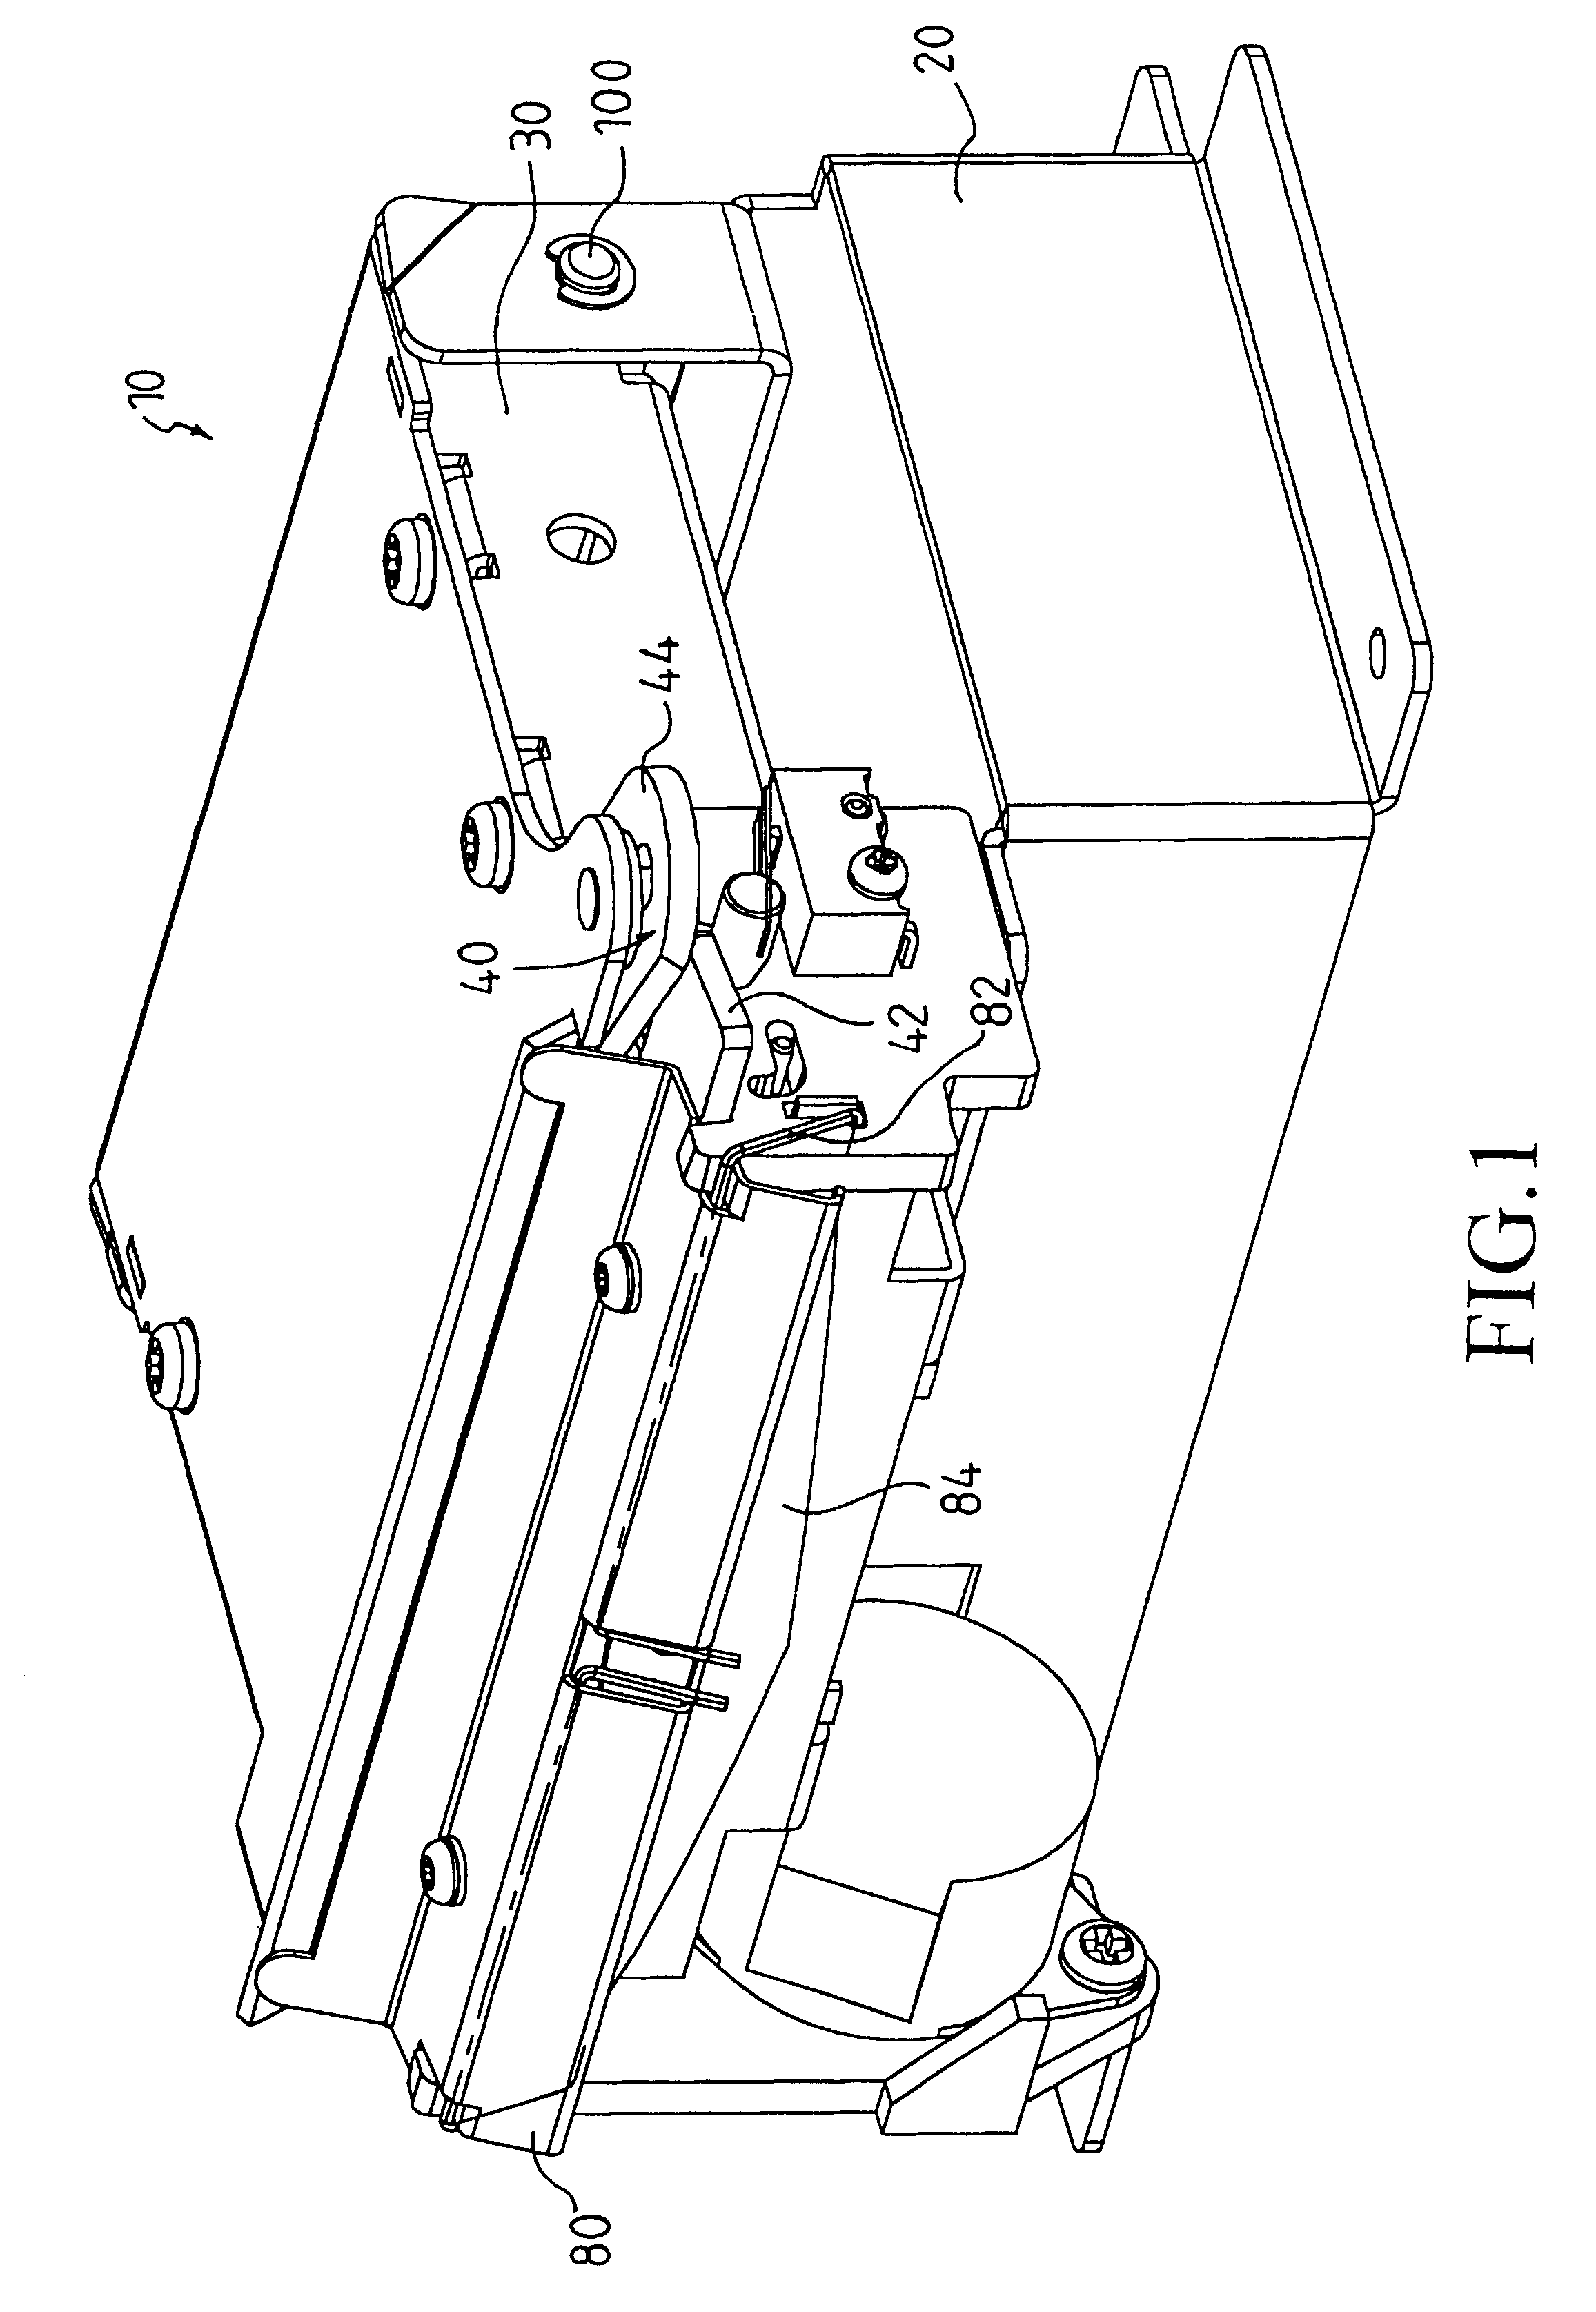 Restraining module for a cutter of a printer